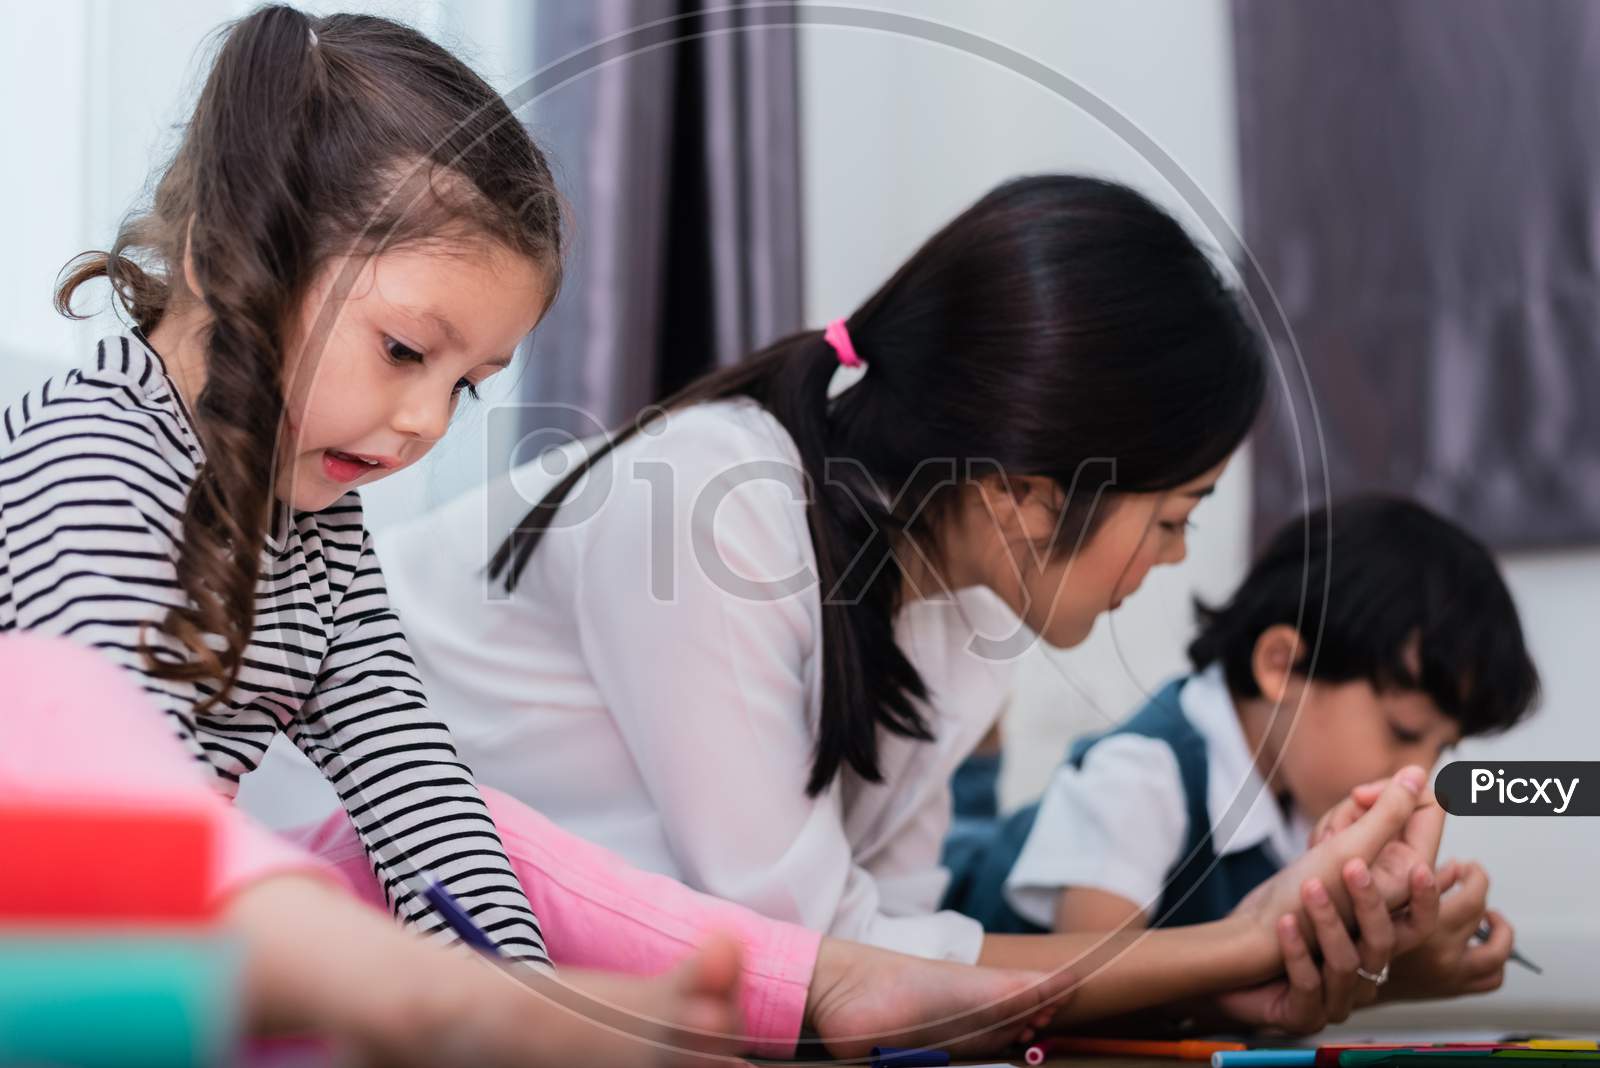 Mother Teaching Children In Drawing Class. Daughter And Son Painting With Colorful Crayon Color In Home. Teacher Training Students In Art Classroom. Education And Learning Development Of Kids Theme.